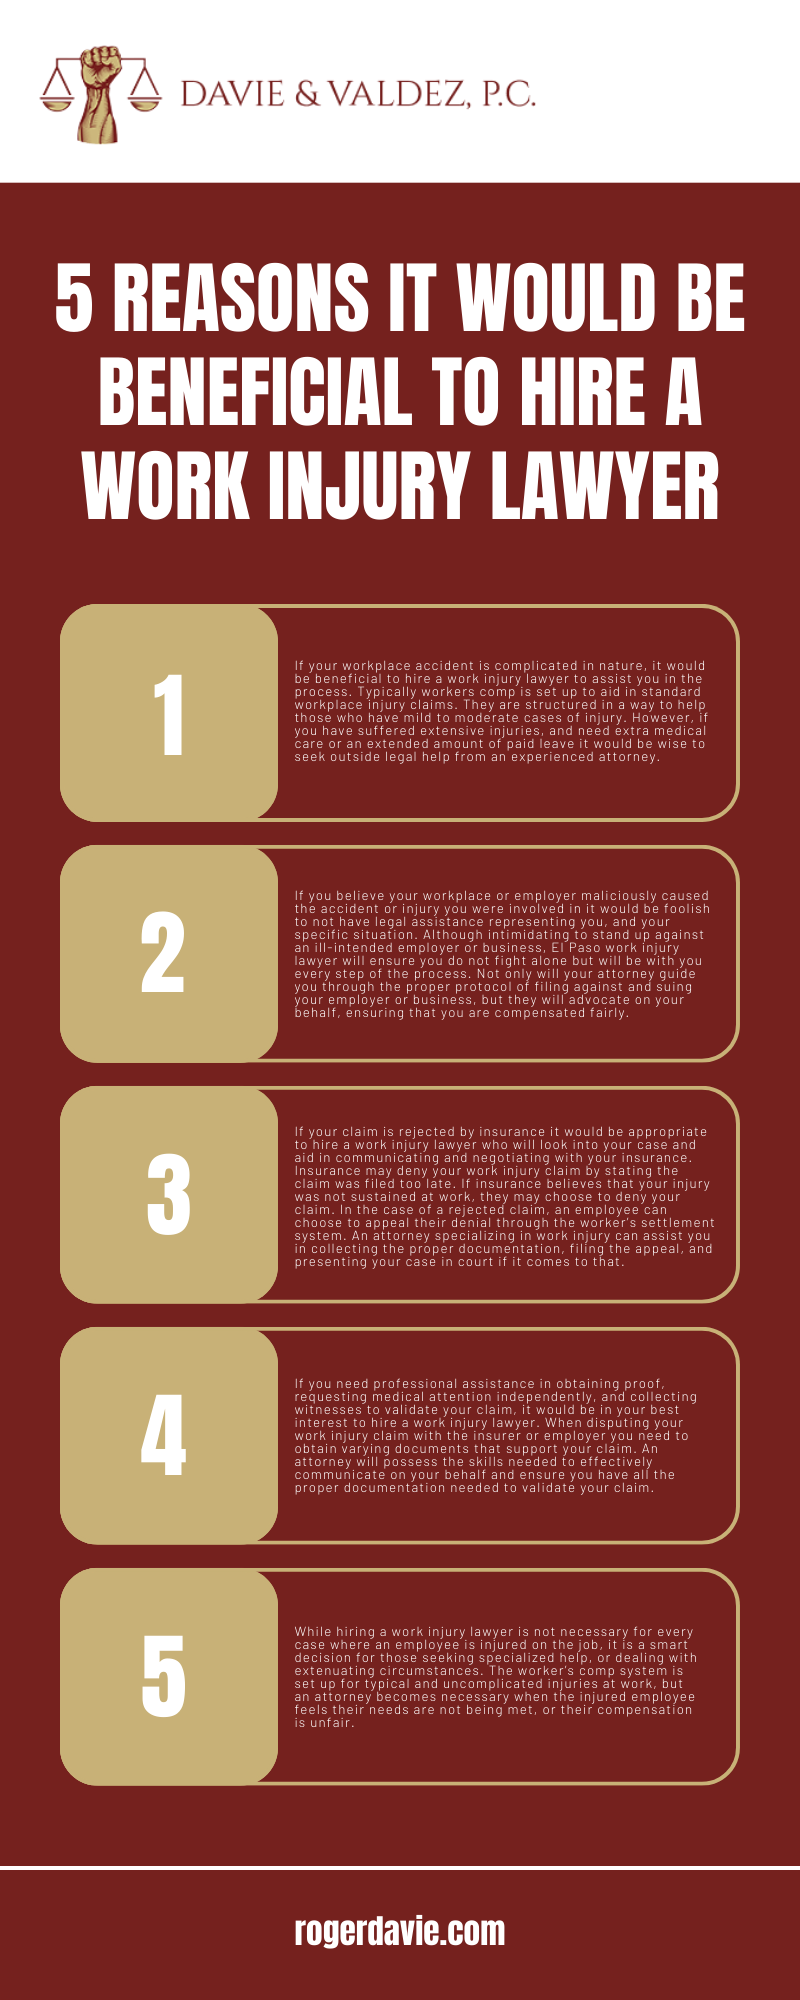 5 Reasons It Would Be Beneficial To Hire A Work Injury Lawyer Infographic